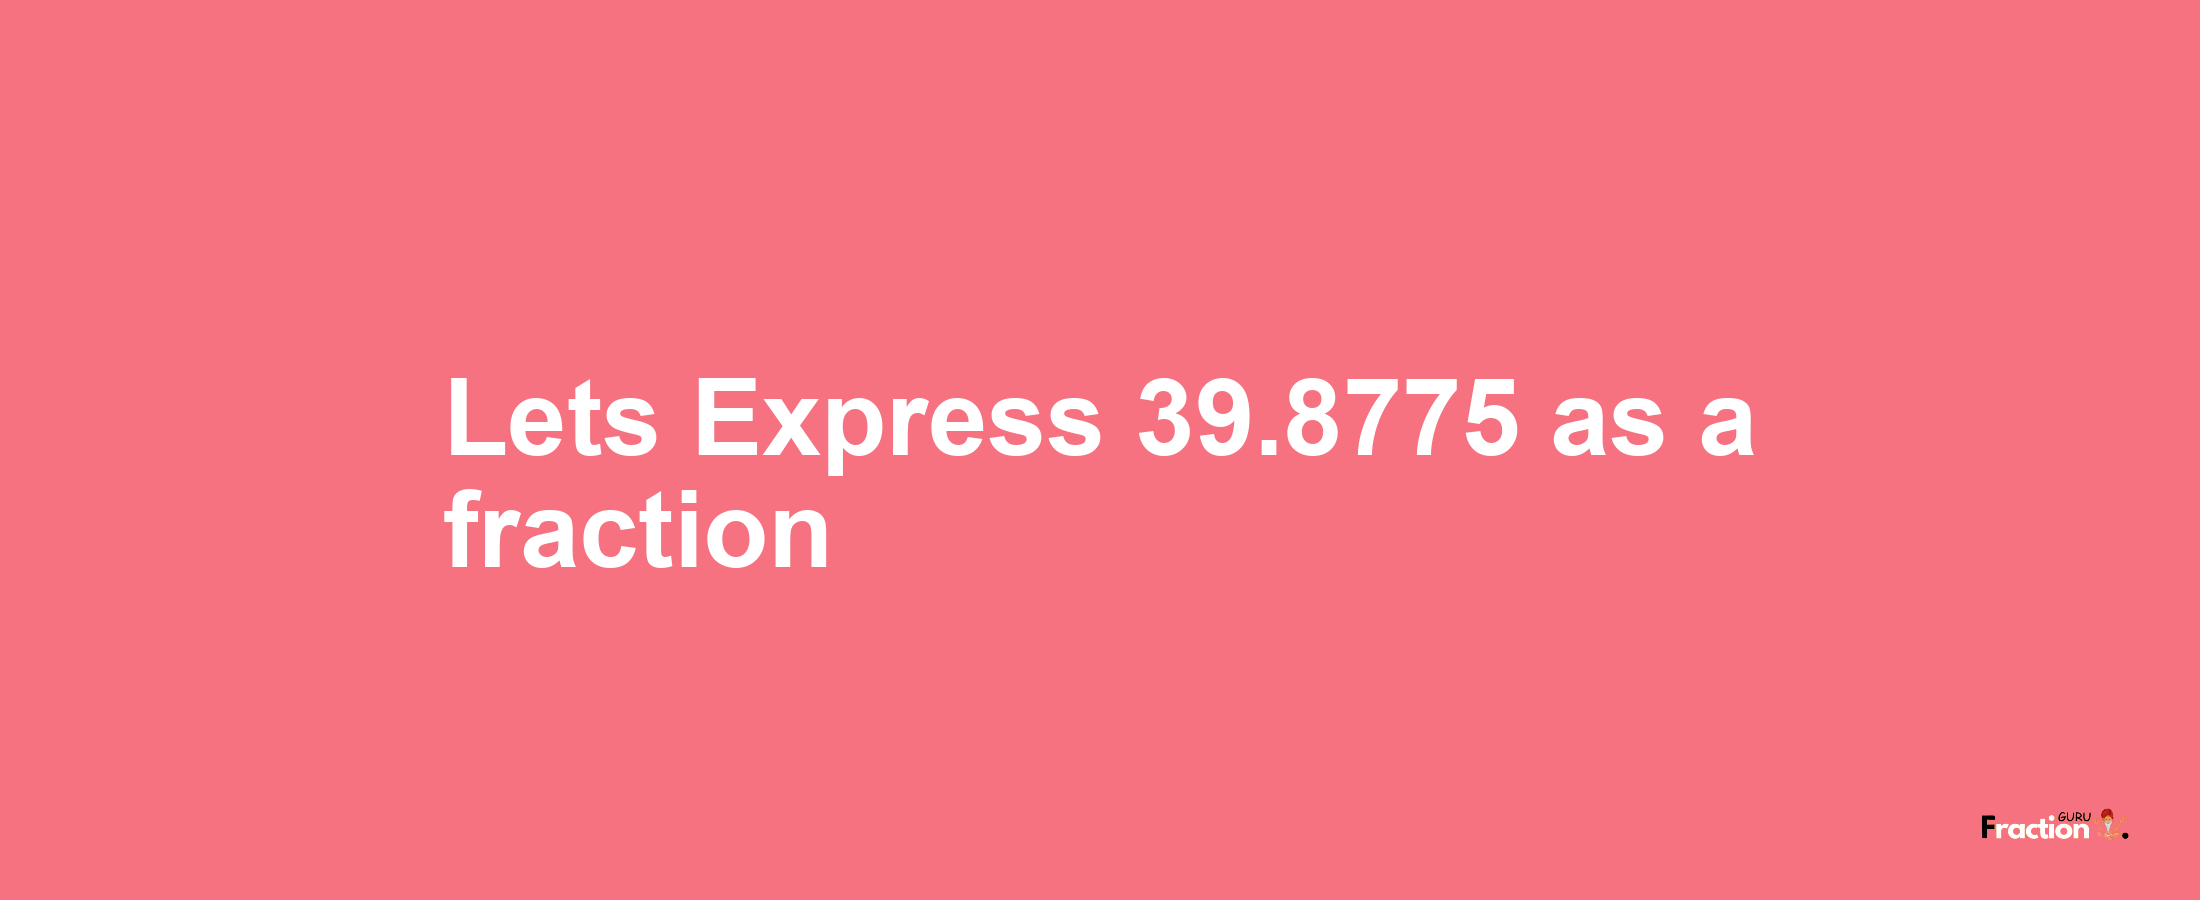 Lets Express 39.8775 as afraction